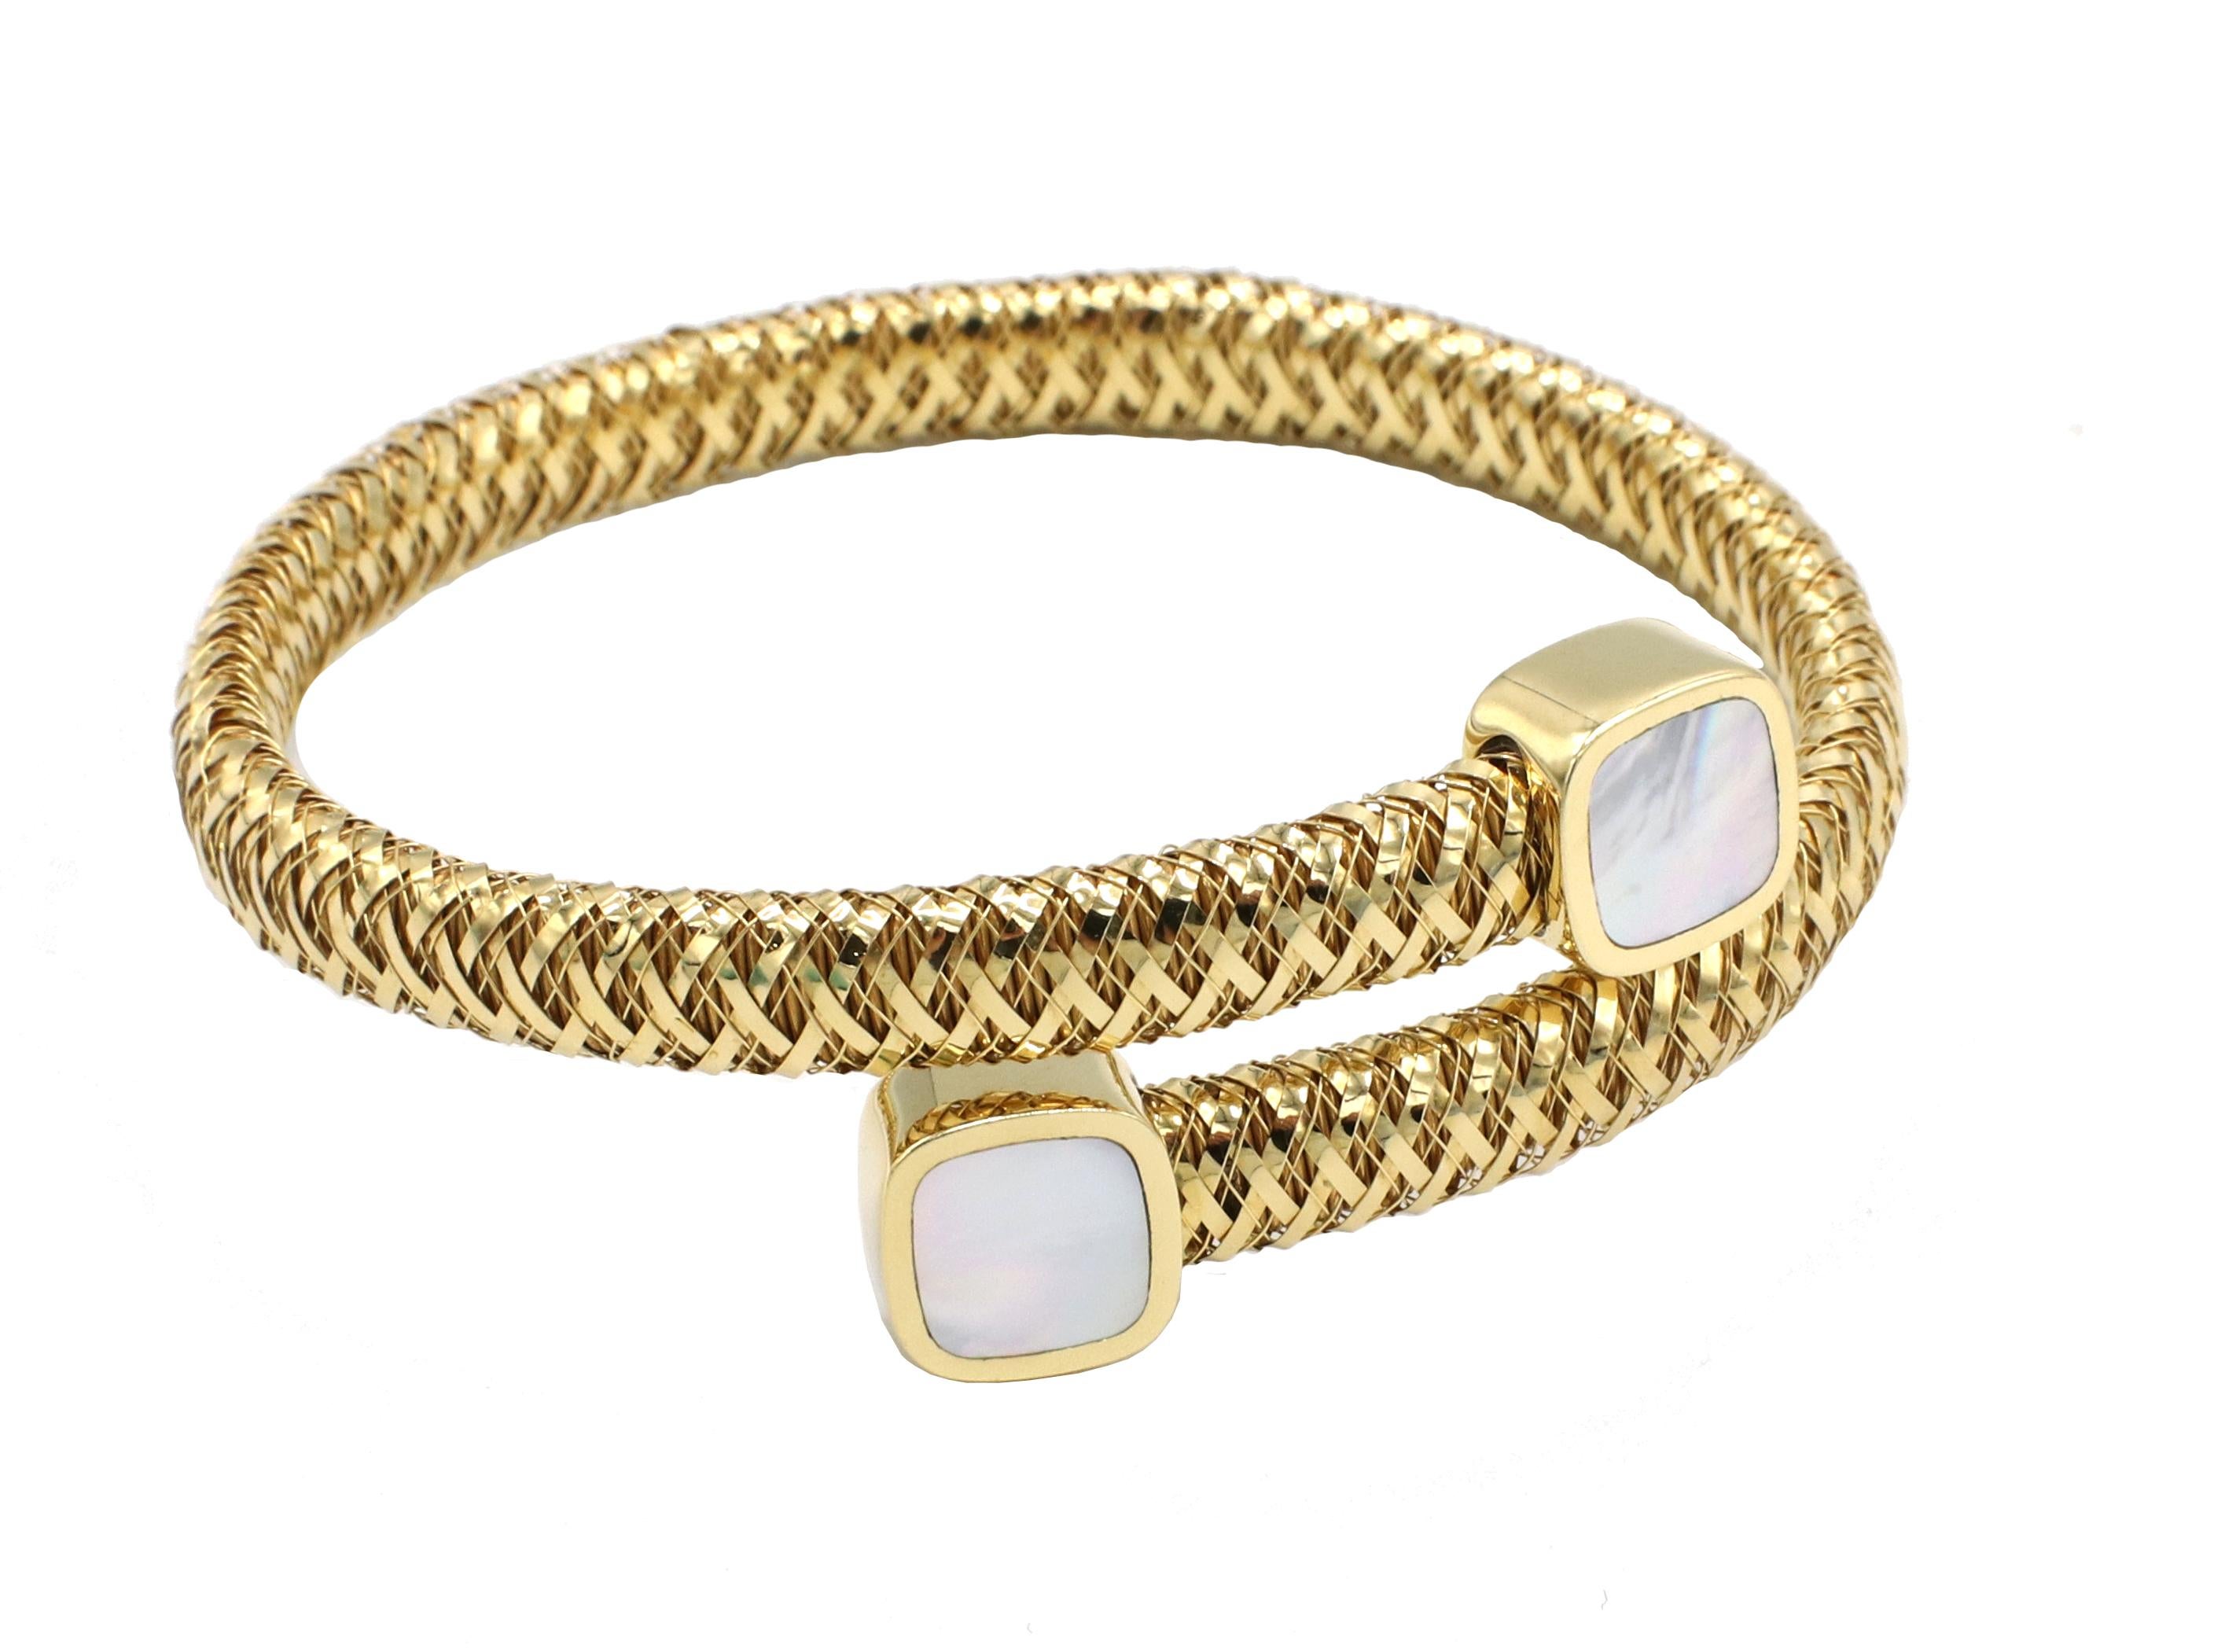 Roberto Coin Primavera 18 Karat Yellow Gold Mother Of Pearl Bypass Coil Bracelet
Metal: 18k yellow gold
Weight: 18.91 grams
Width: 7-10mm 
Signed: RC 750 18K ITALY
Wrist size: 6.5 inch (slightly flexible) 
